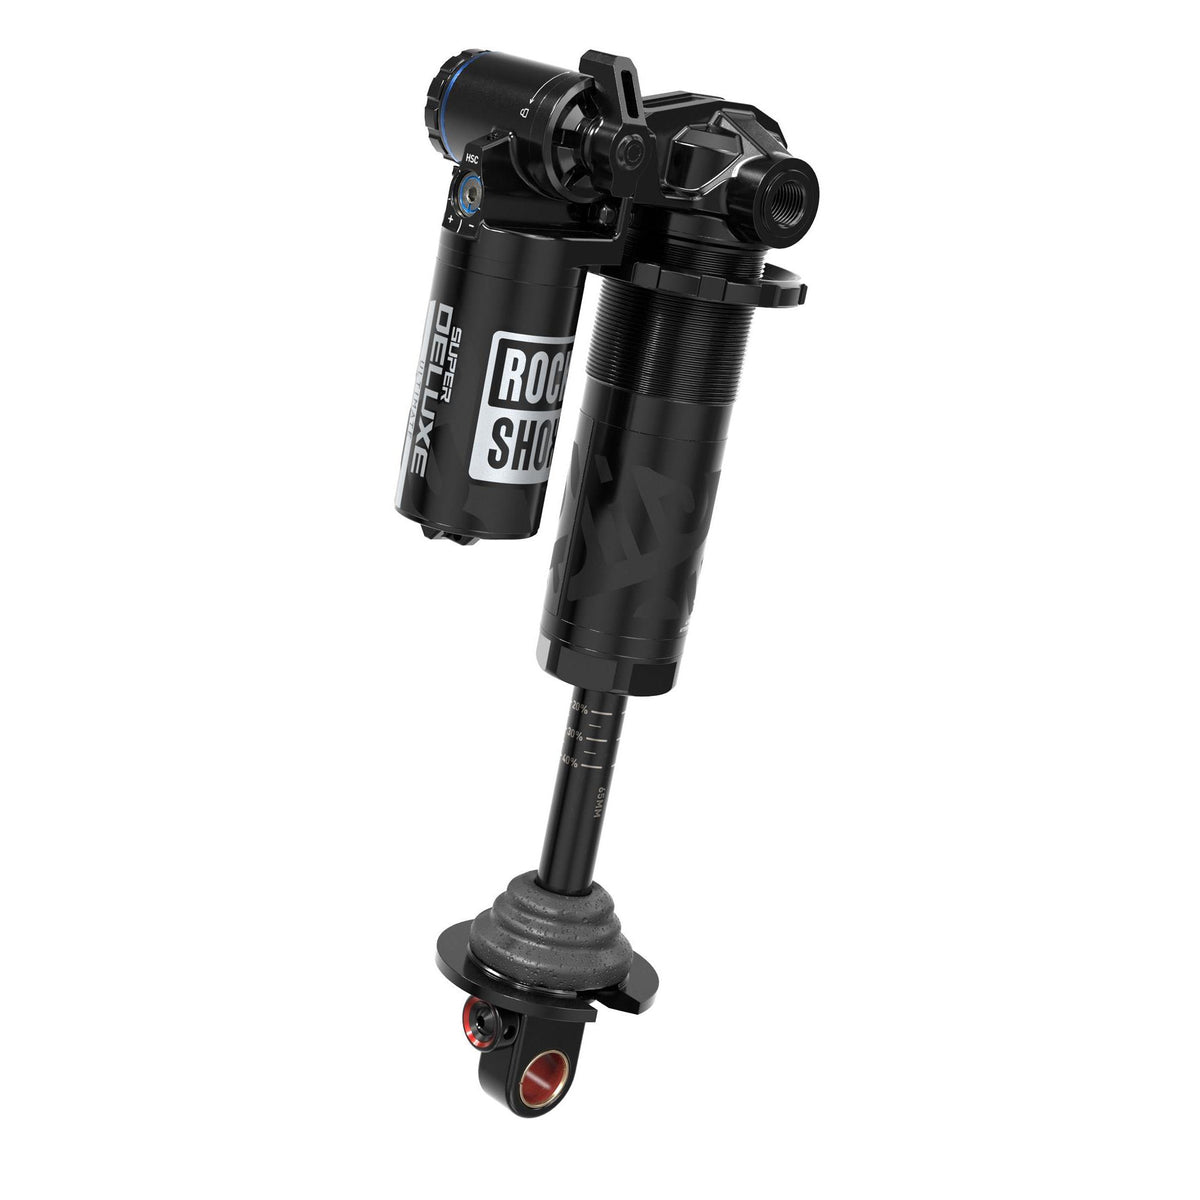 Rockshox Super Deluxe Coil Ultimate Rear Shock RC2T - Linearreb/Lcomp, 320LB Lockout, Hydraulic Bottom Out, Standard Trunnion(8X30) (Spring Sold Separate) B1 Norco Sight 2017-2019 Black 185X55